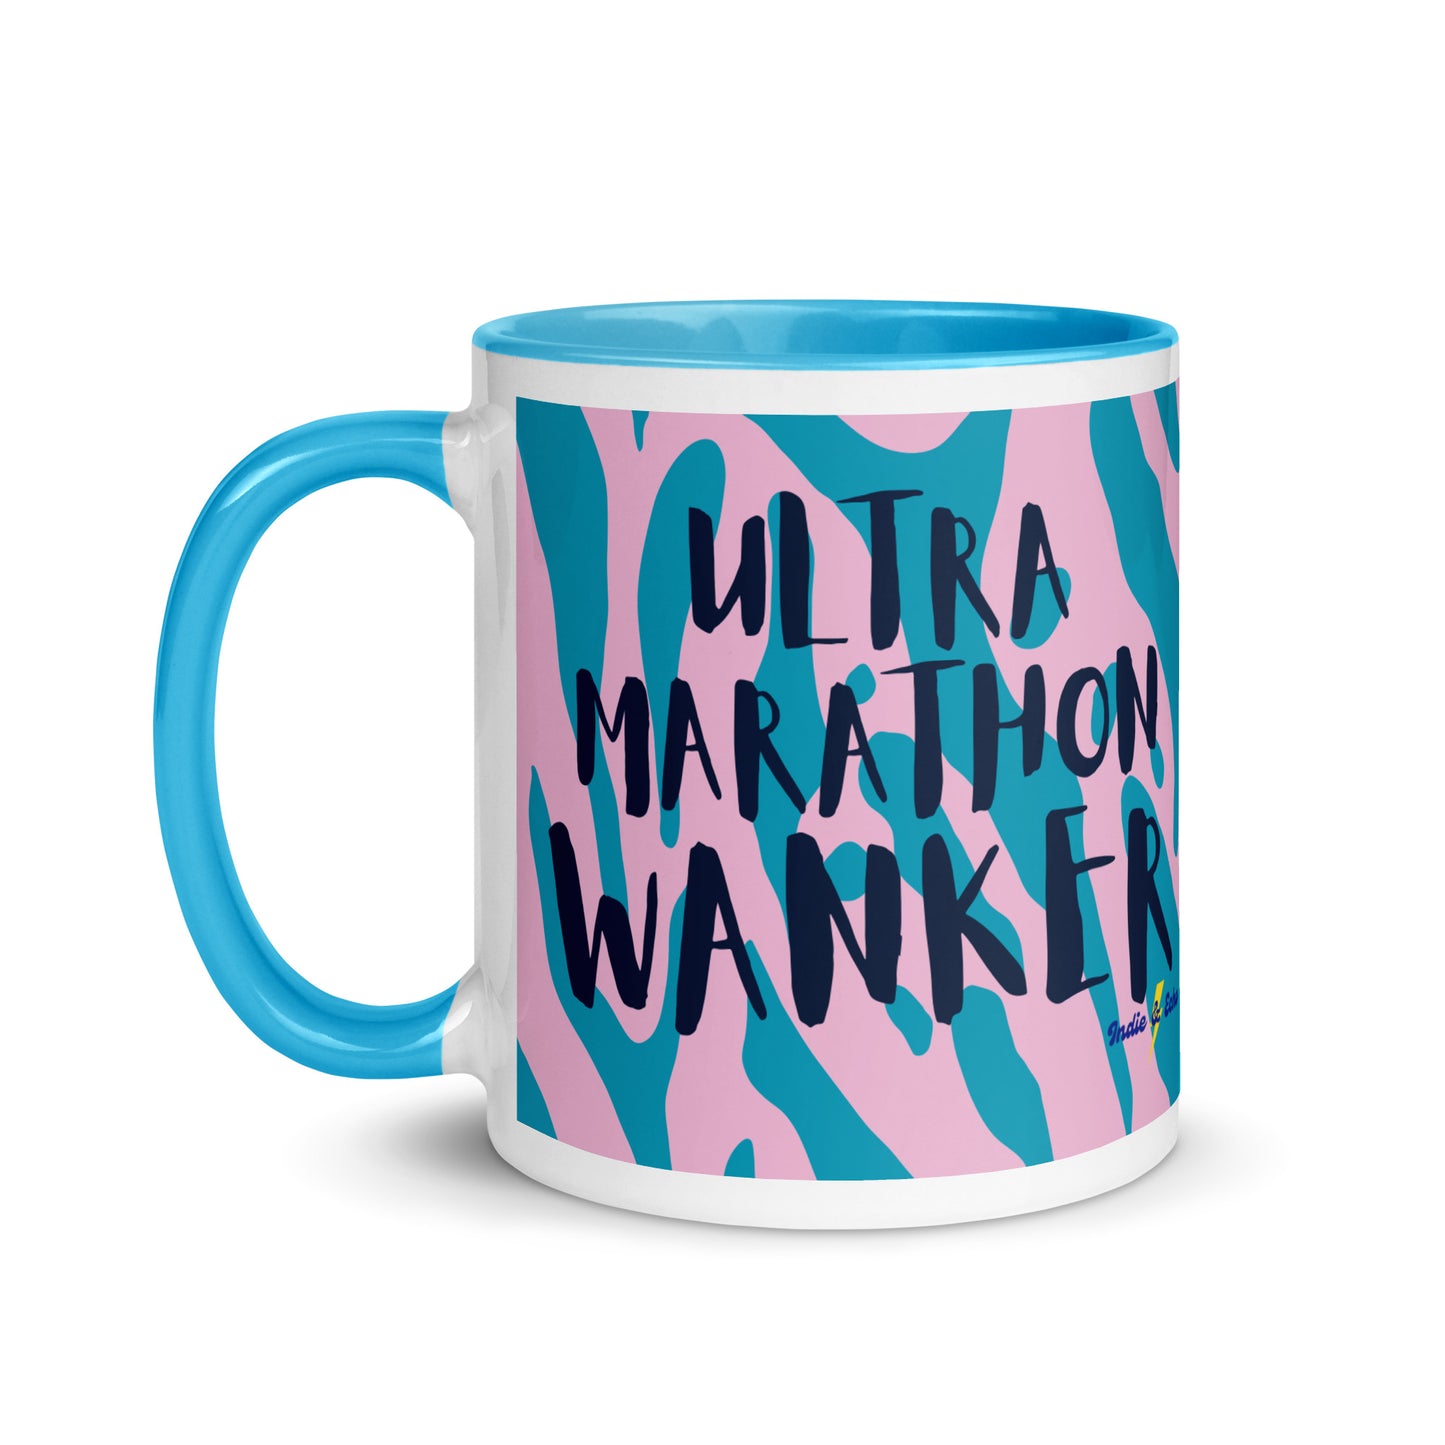 coffee mug with a blue handle and rim, with the words ultra marathon wanker written across a pink and blue animal print background. this is a running gift for ultra marathoners.